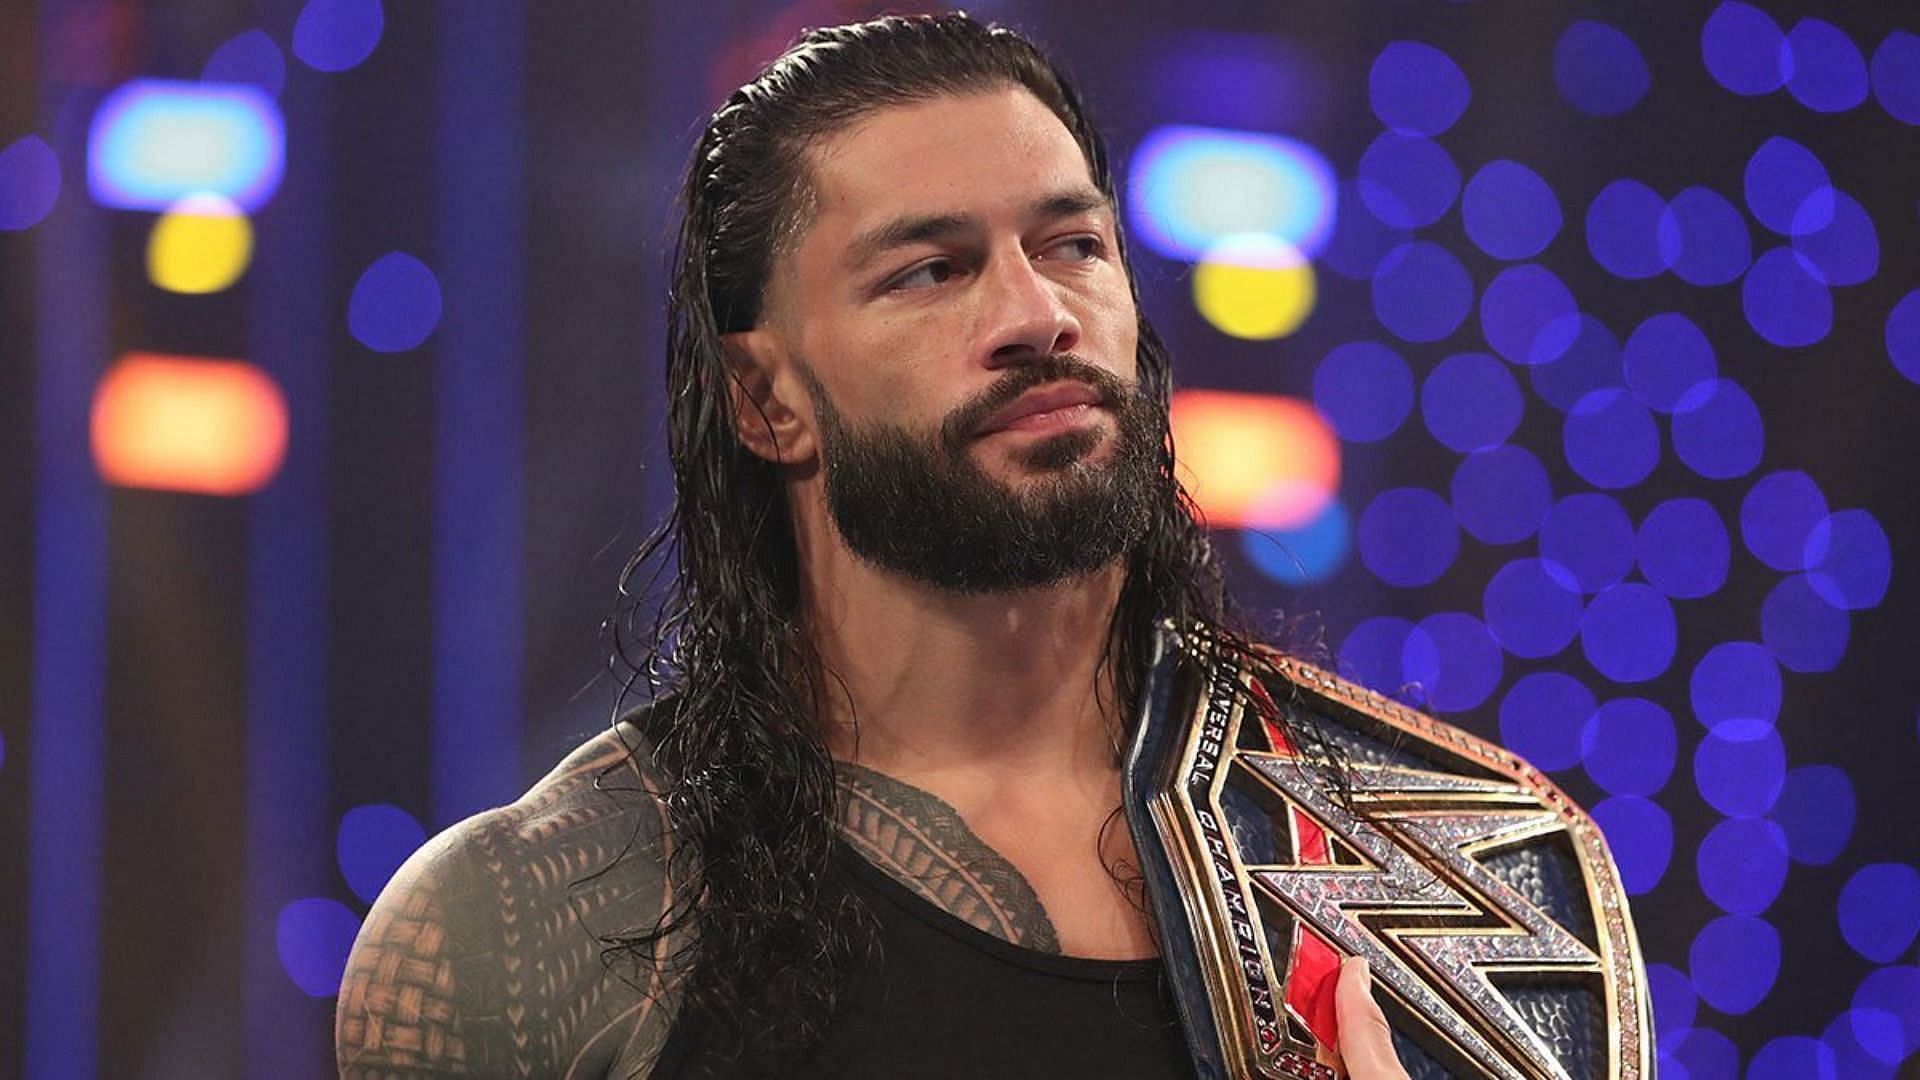 Reigns has dominated ever since returning in 2020